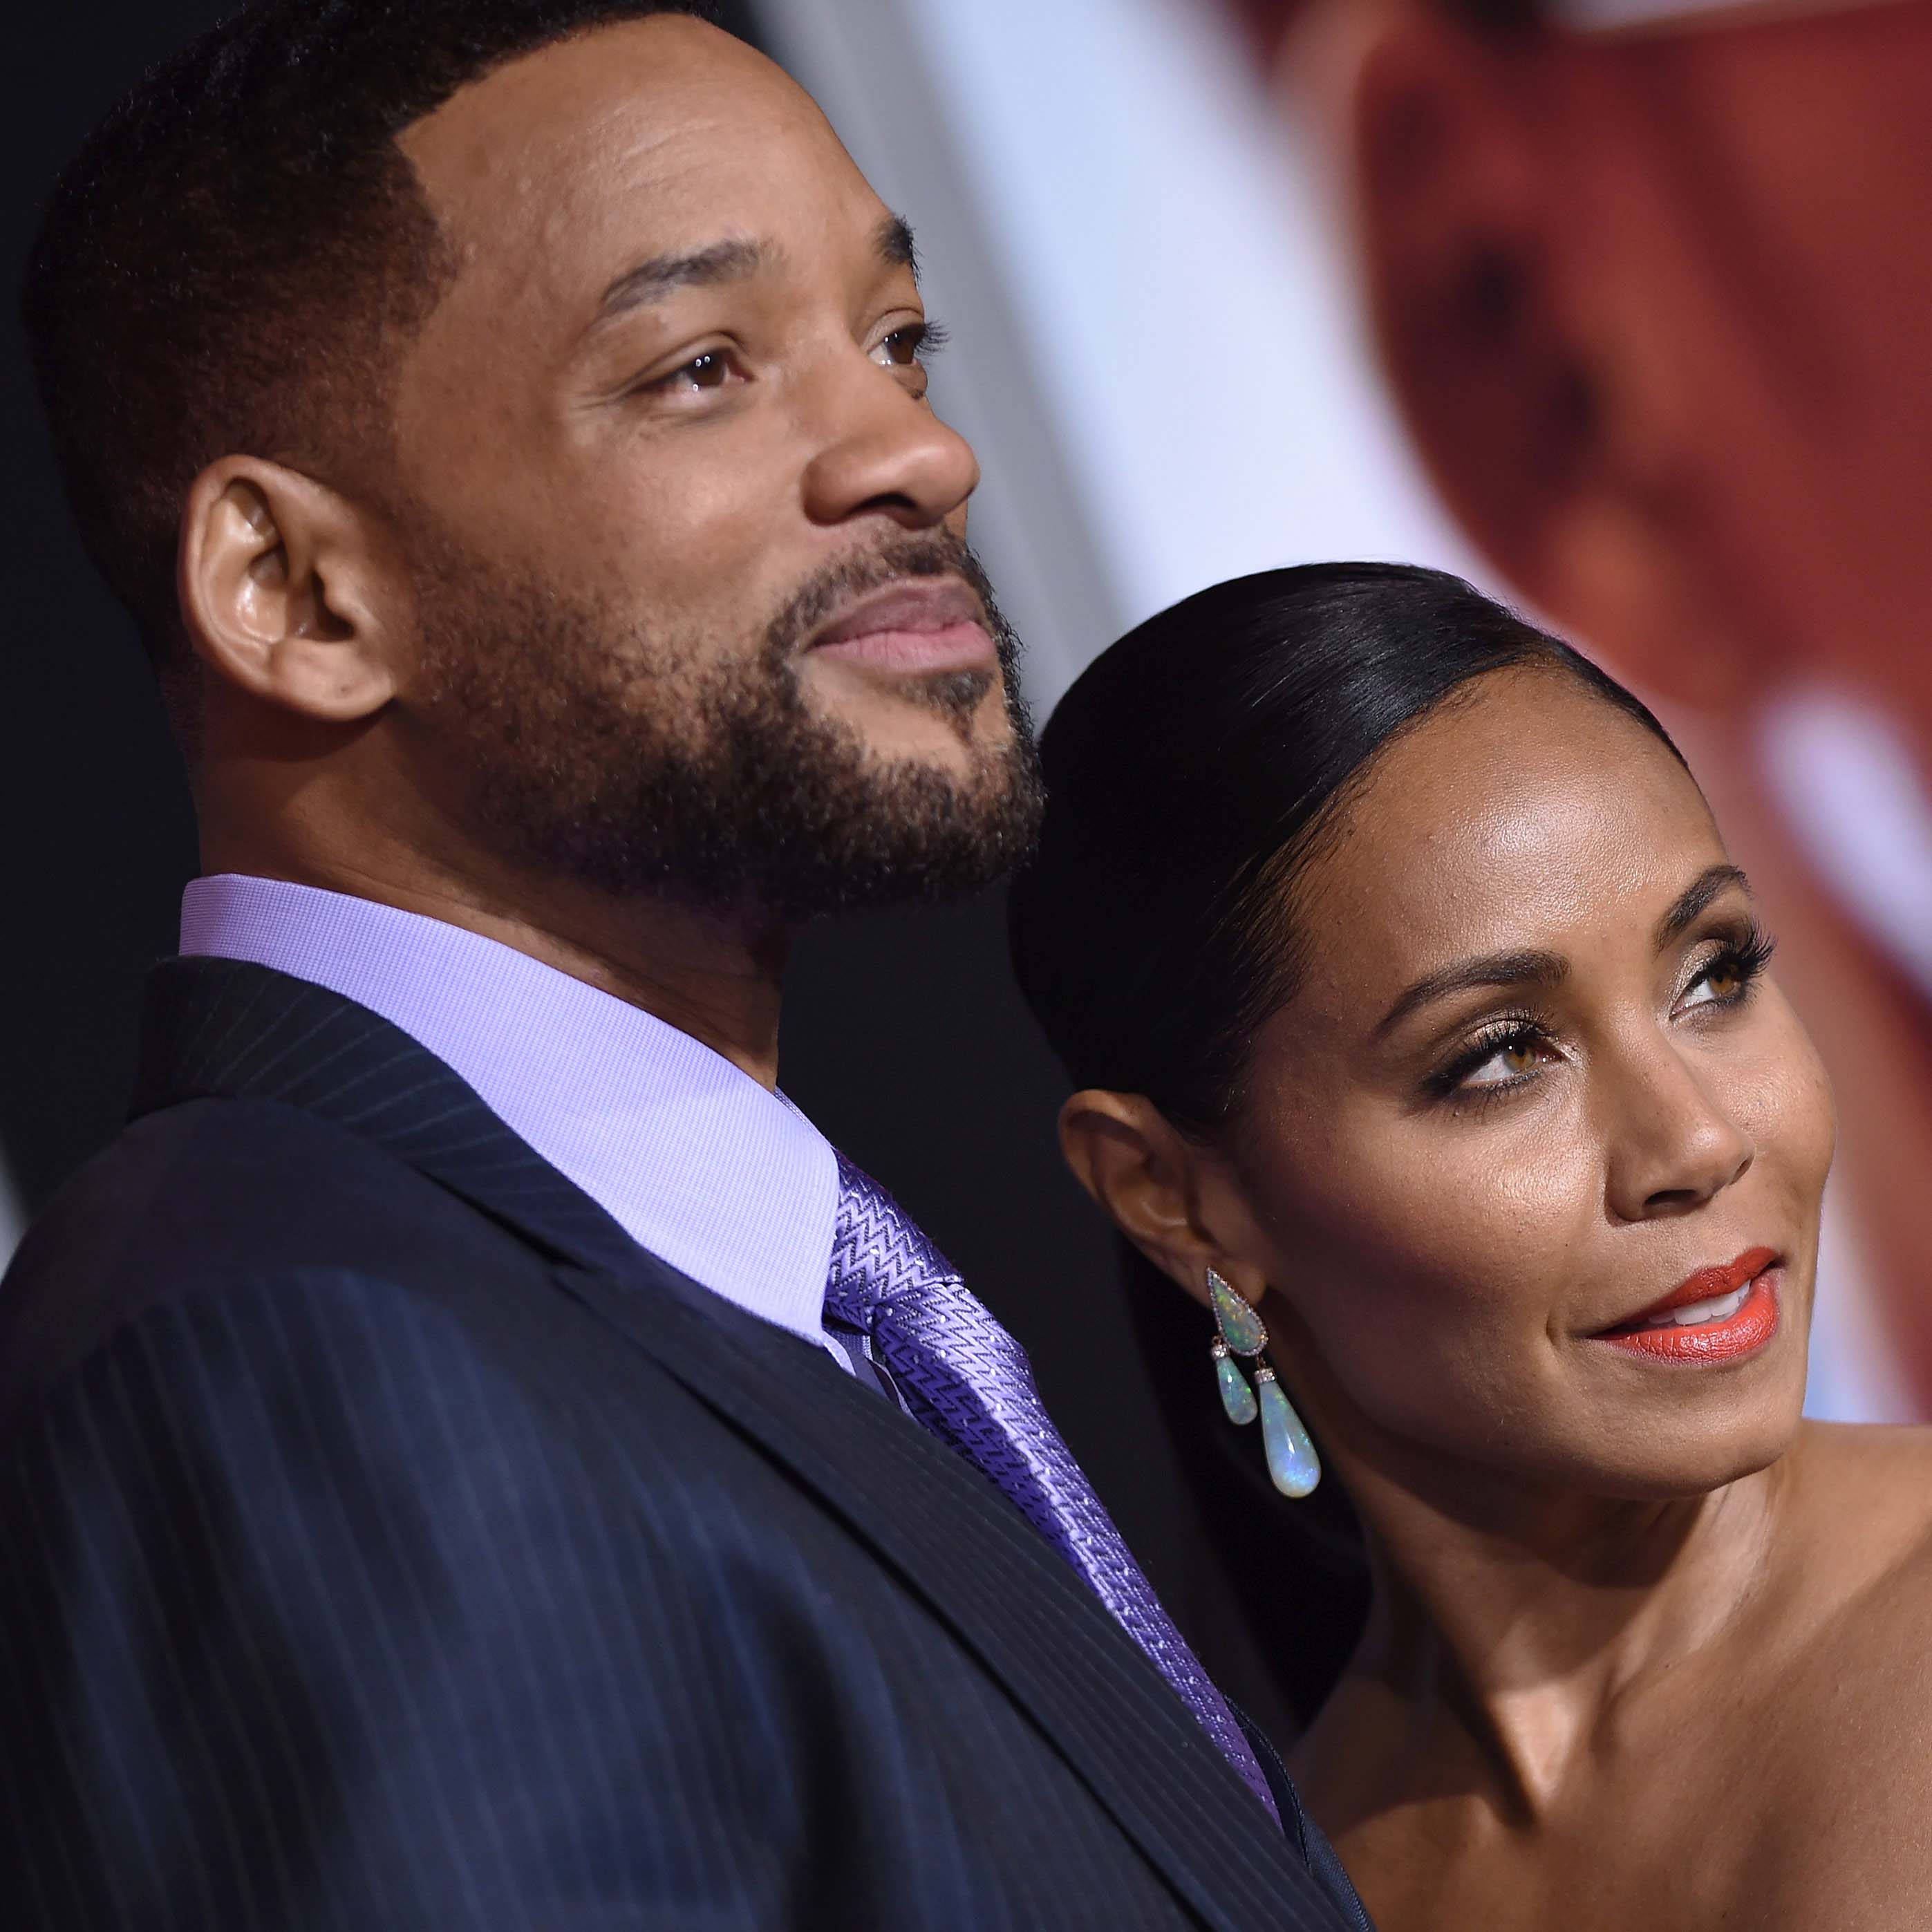 Jada Pinkett Smith on Marital Status, What People Get Wrong About